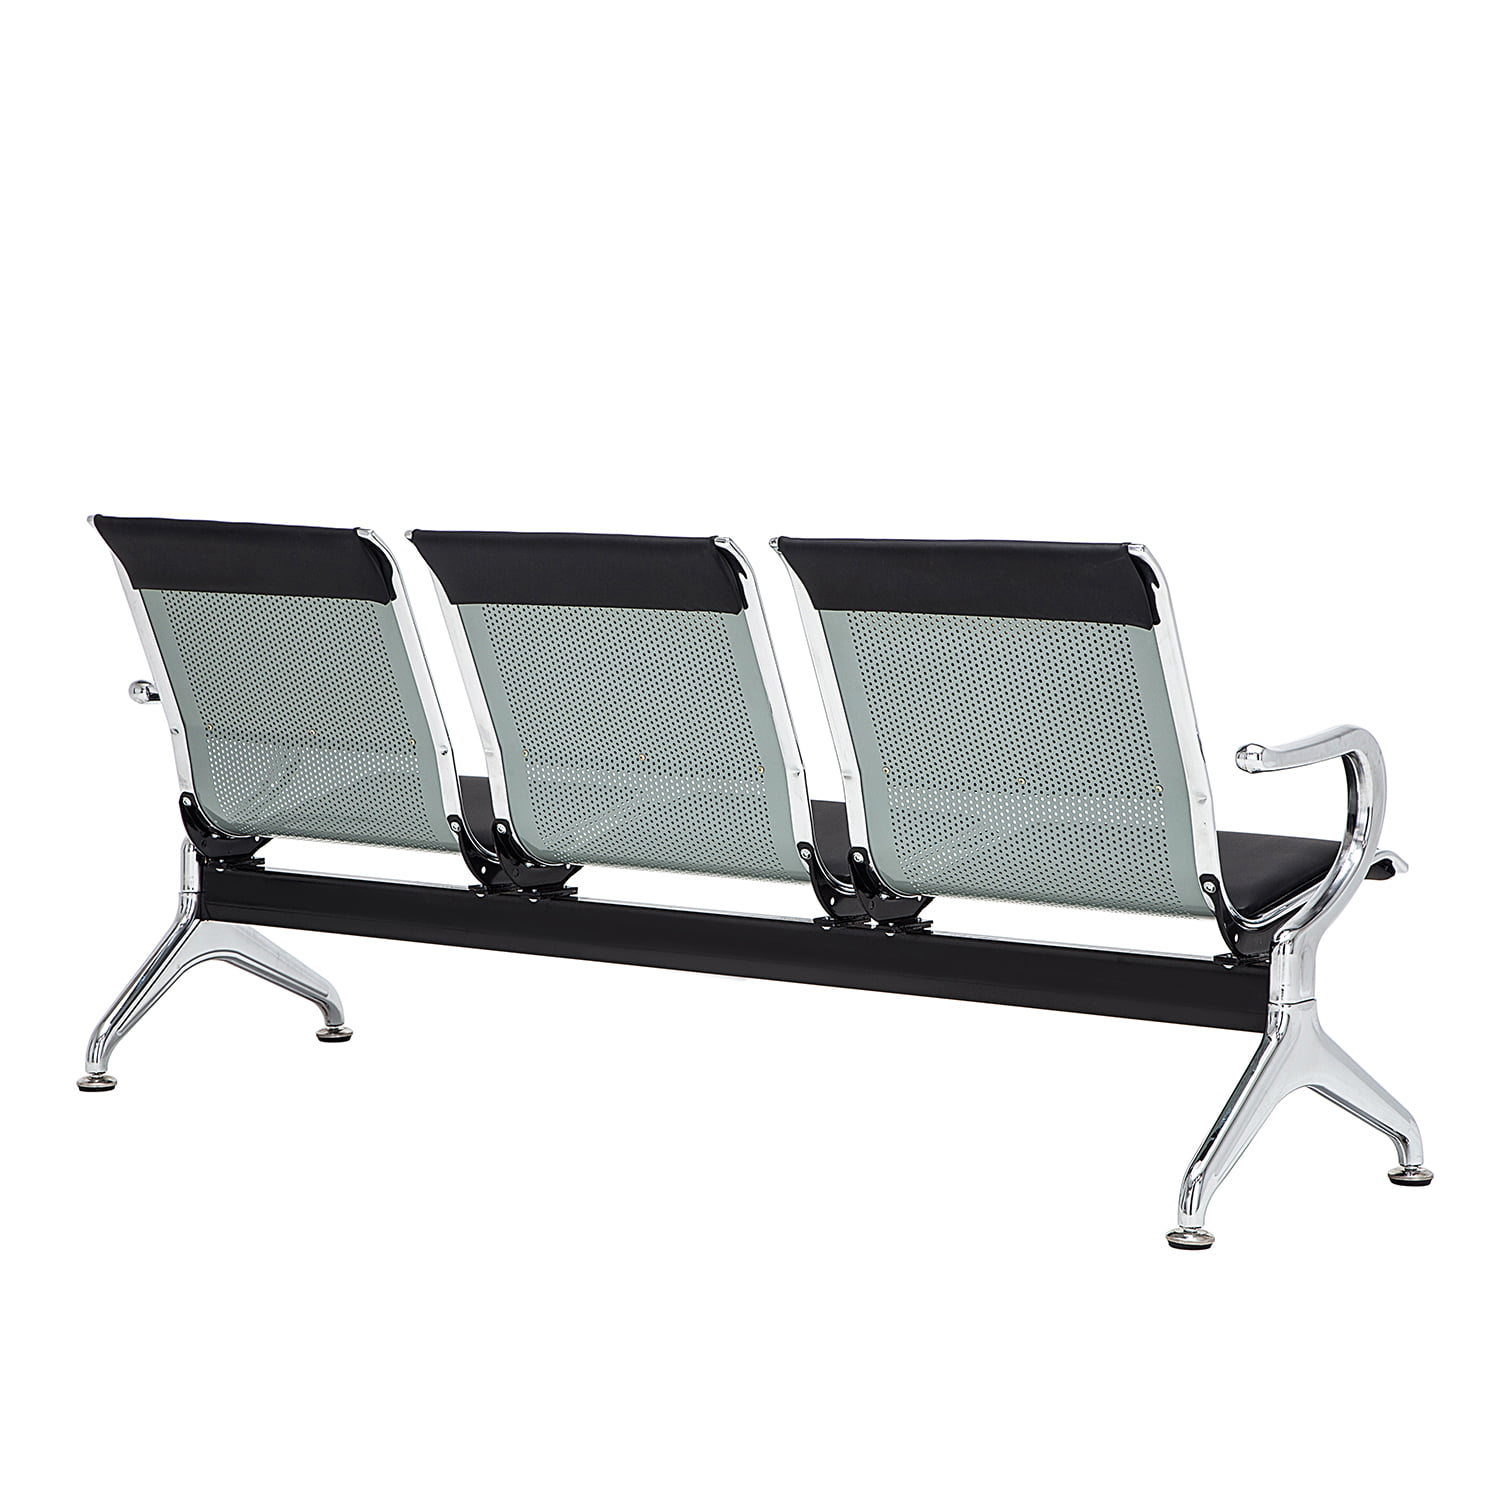 Airport Market Waiting Room Bench Seating with Back Airport Bench Seating Reception Chairs for Business Office Hospital Barbershop